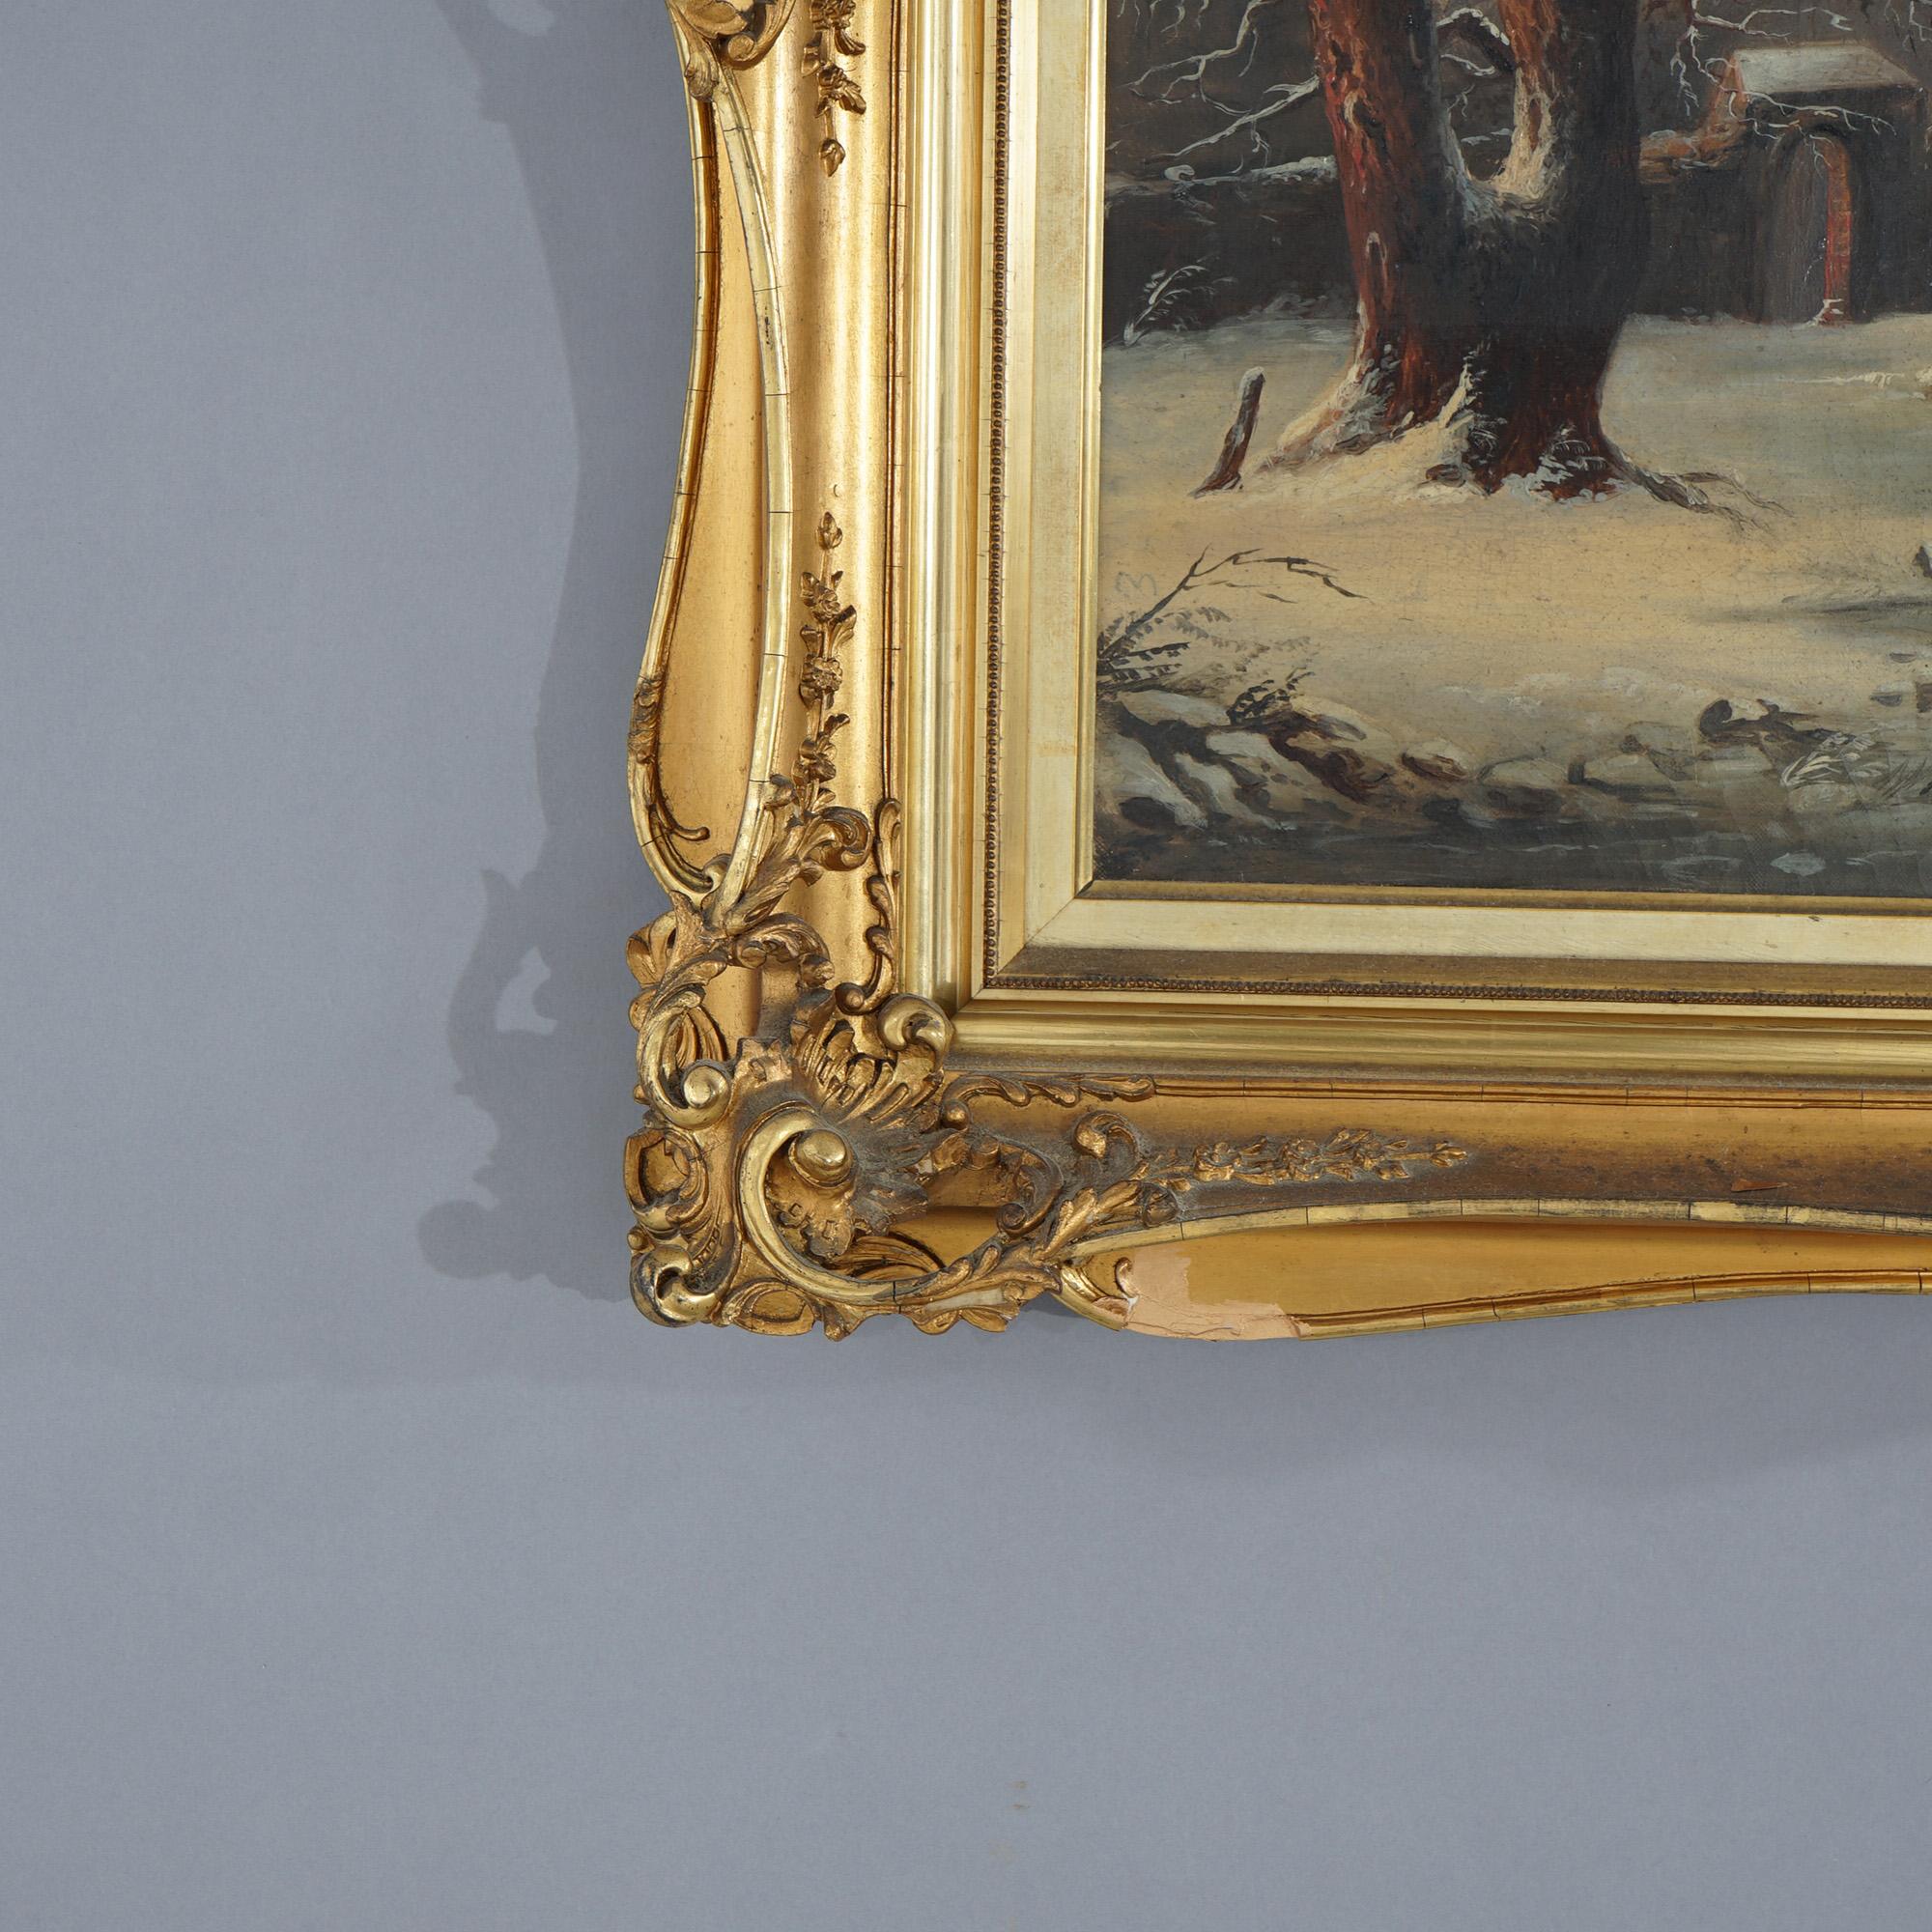 Antique Oil Painting Winter Landscape with Ice Skaters in Giltwood frame c1890 In Good Condition For Sale In Big Flats, NY